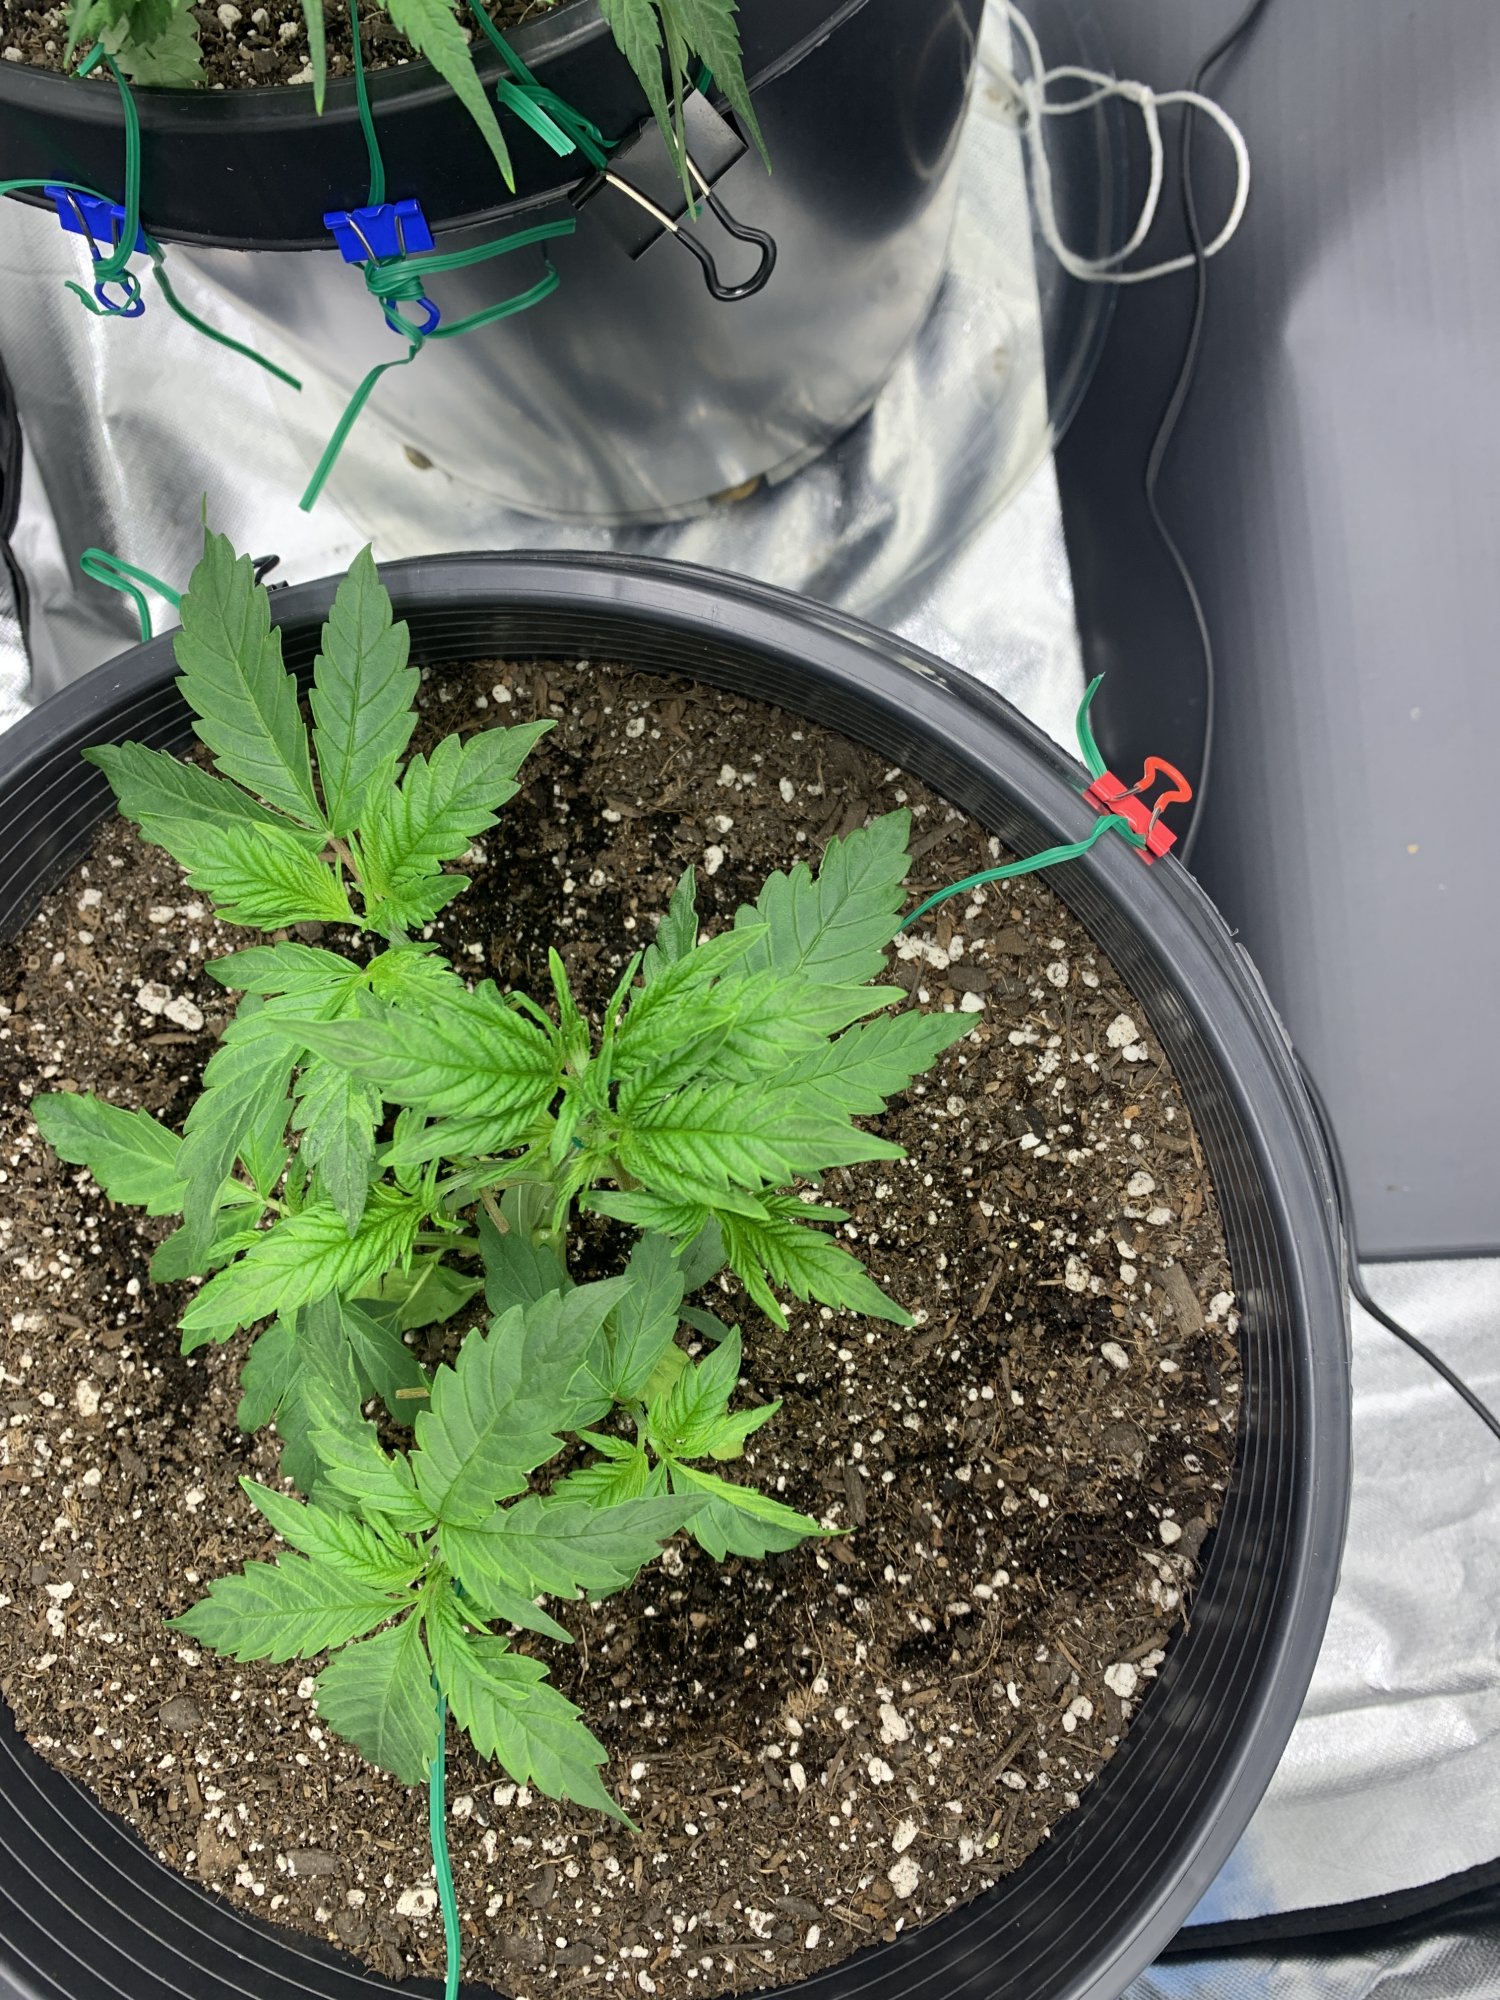 Need help with the second grow